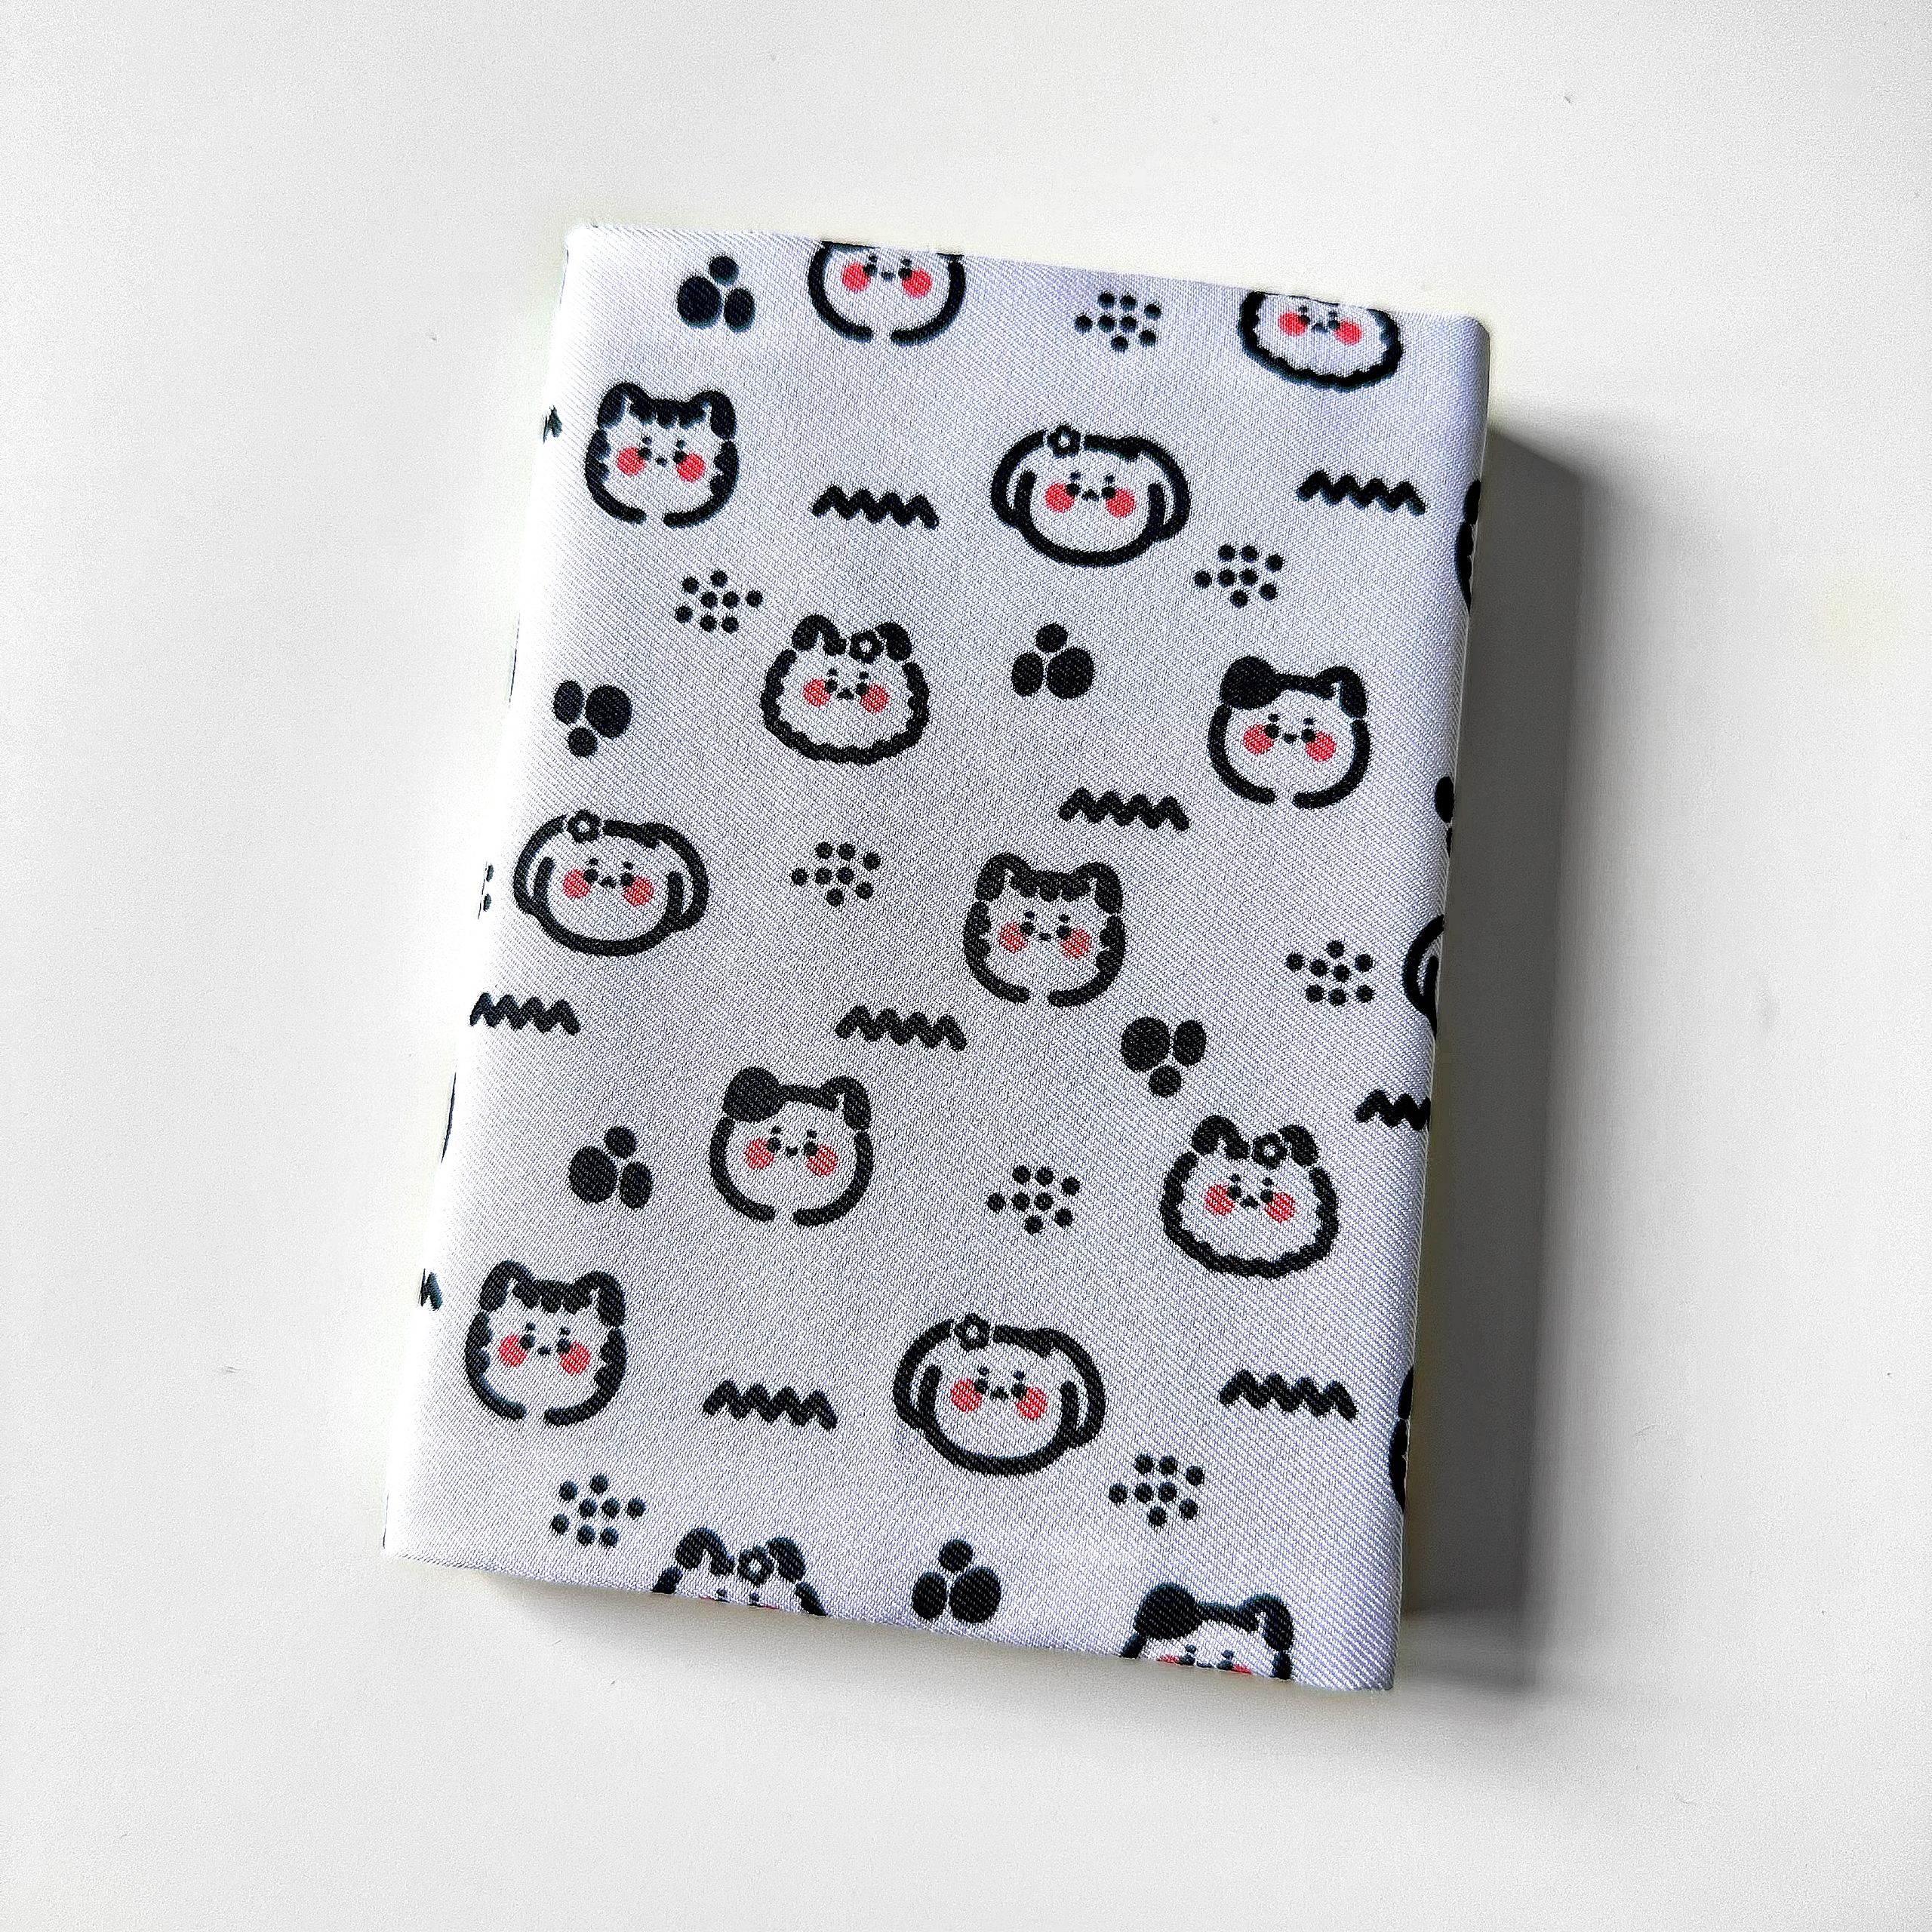 A6 Journal/Book Fabric Cover